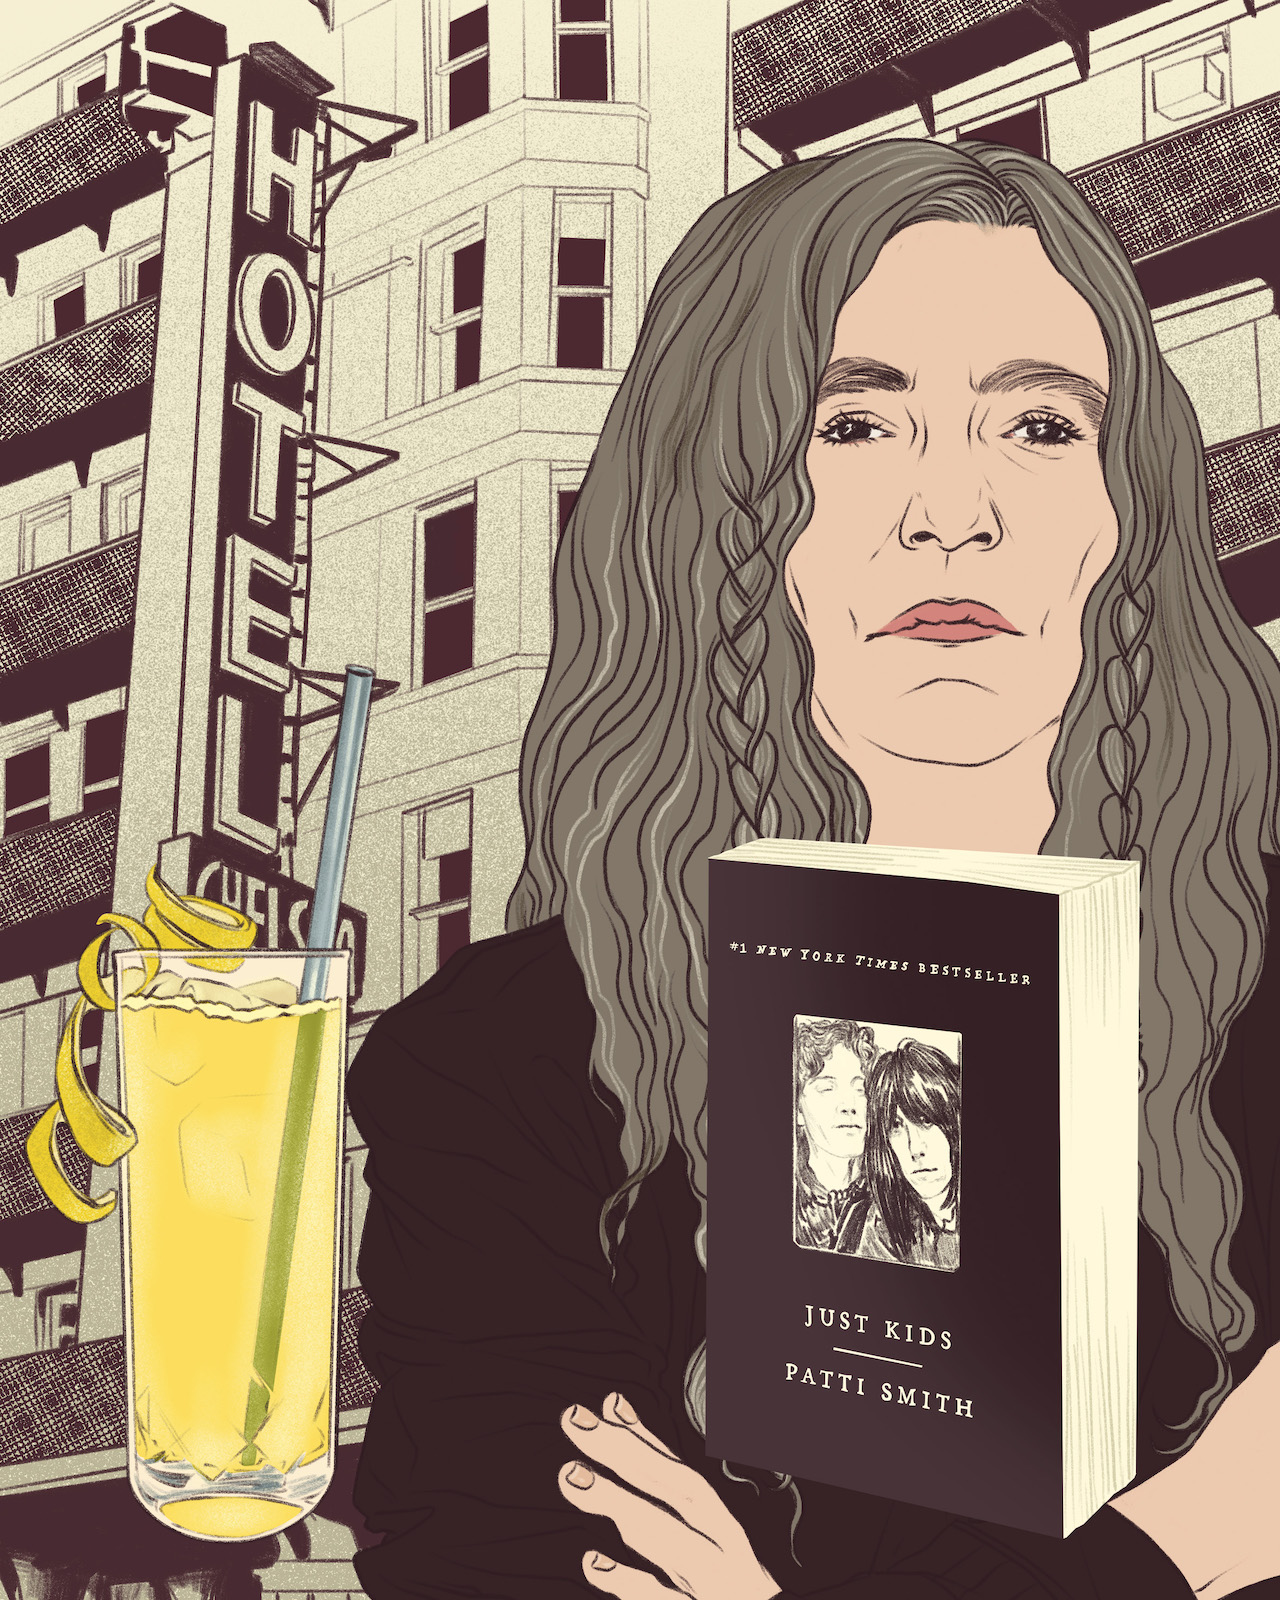 Drawing of Patti Smith and the cocktail named after her